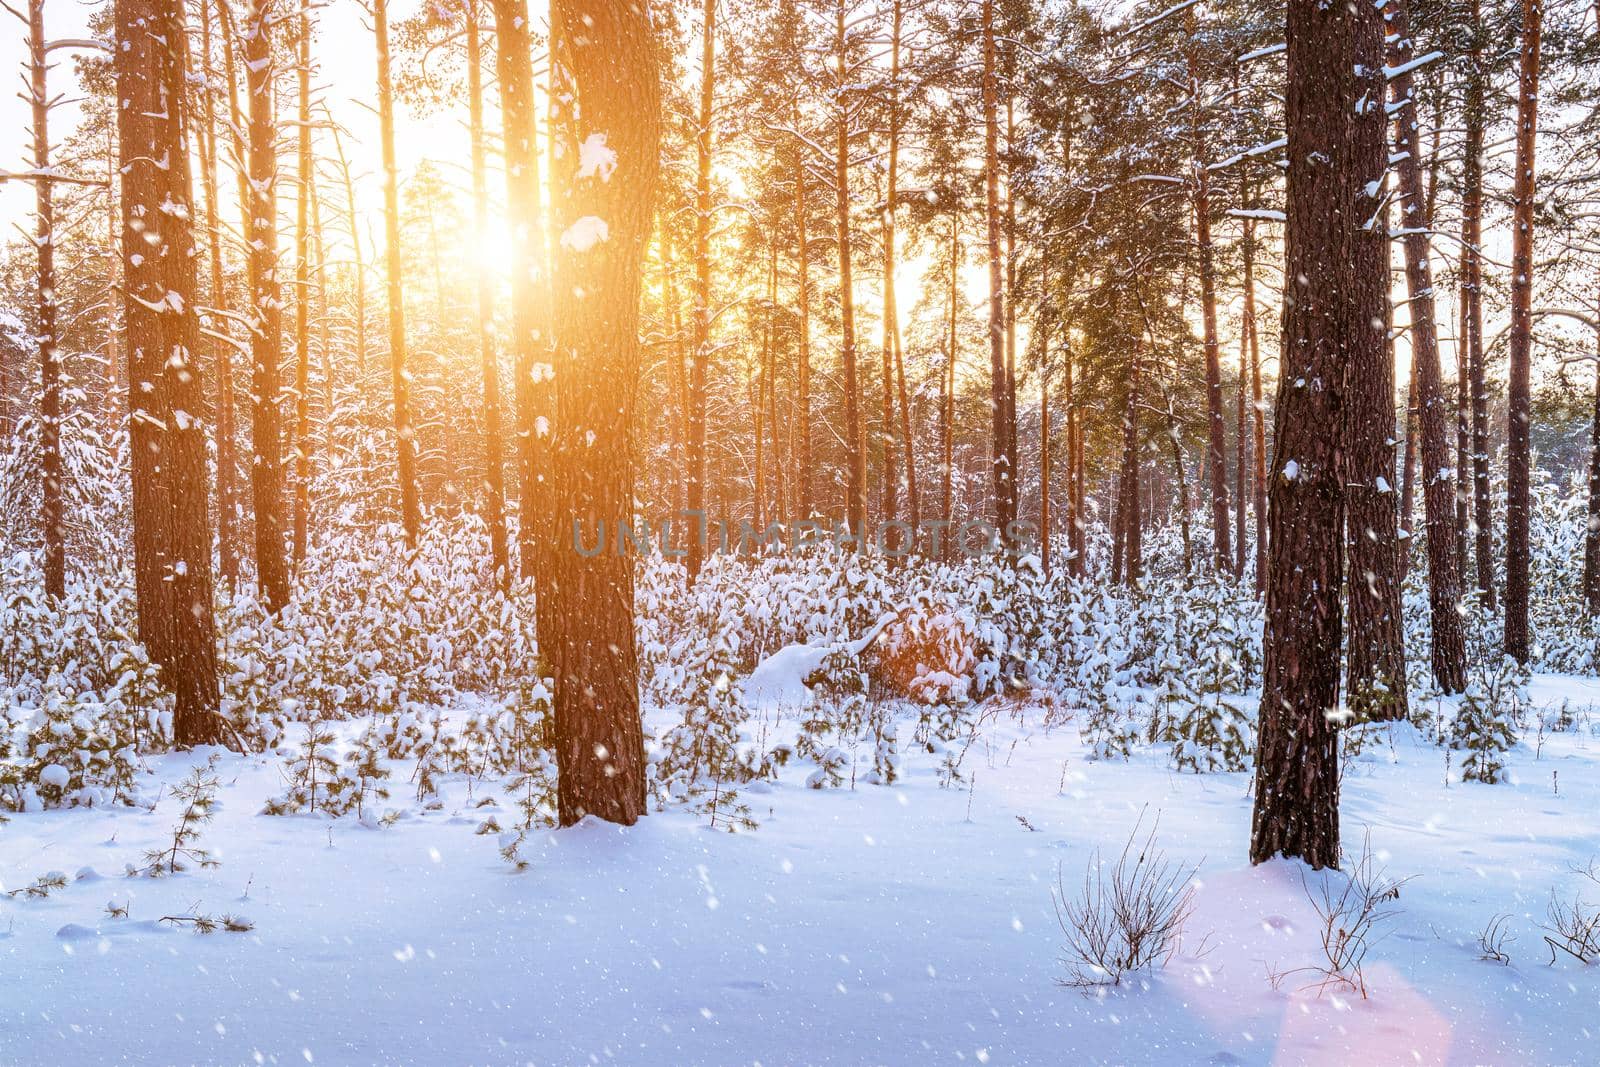 Sunset or sunrise in the winter pine forest with falling snow. Rows of pine trunks with the sun's rays passing through them. Snowfall.